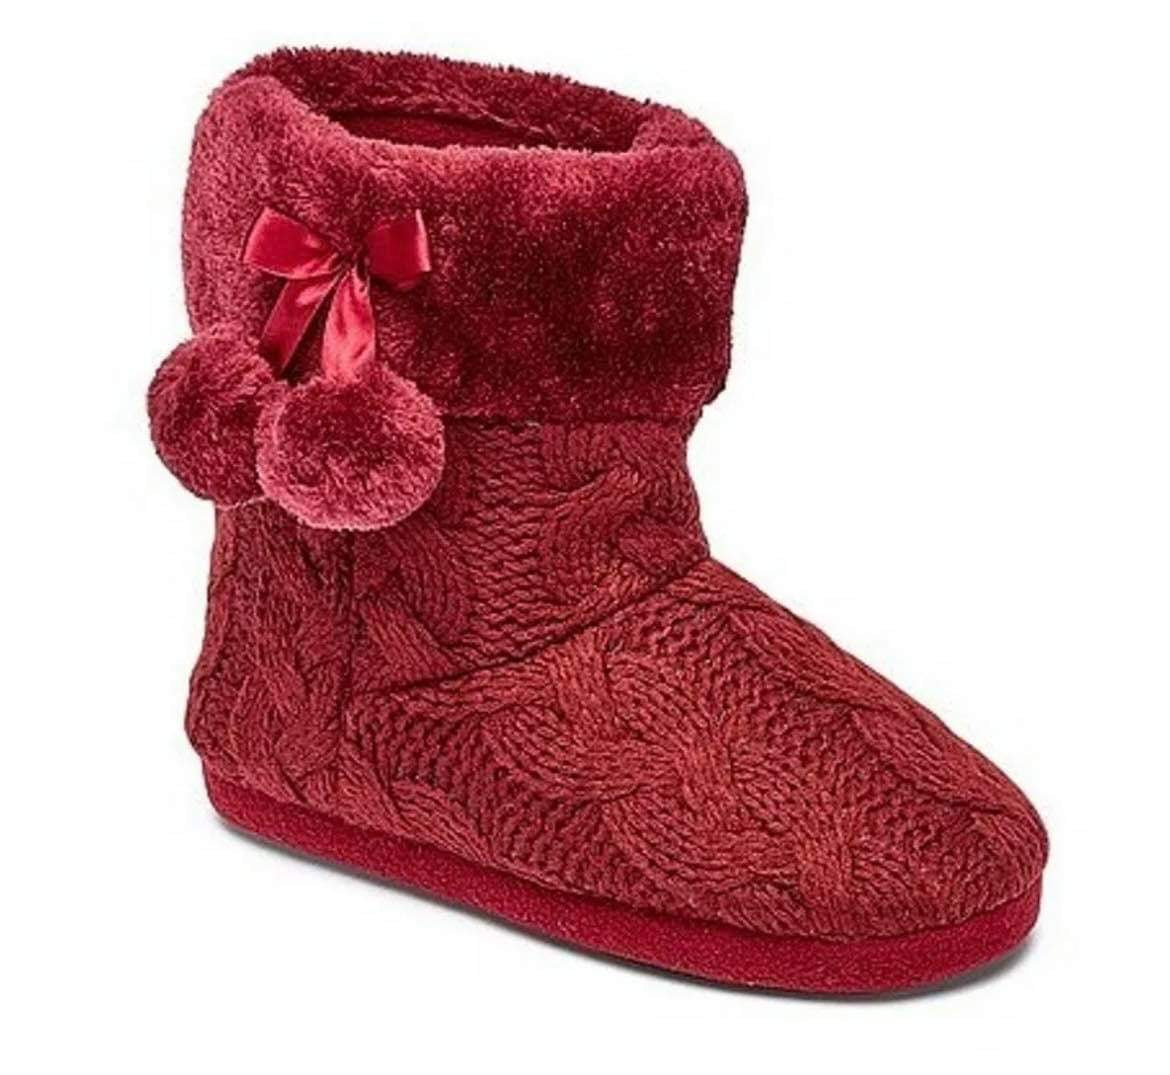 Women’s Cable Knit Pom Pom Bootie Slippers